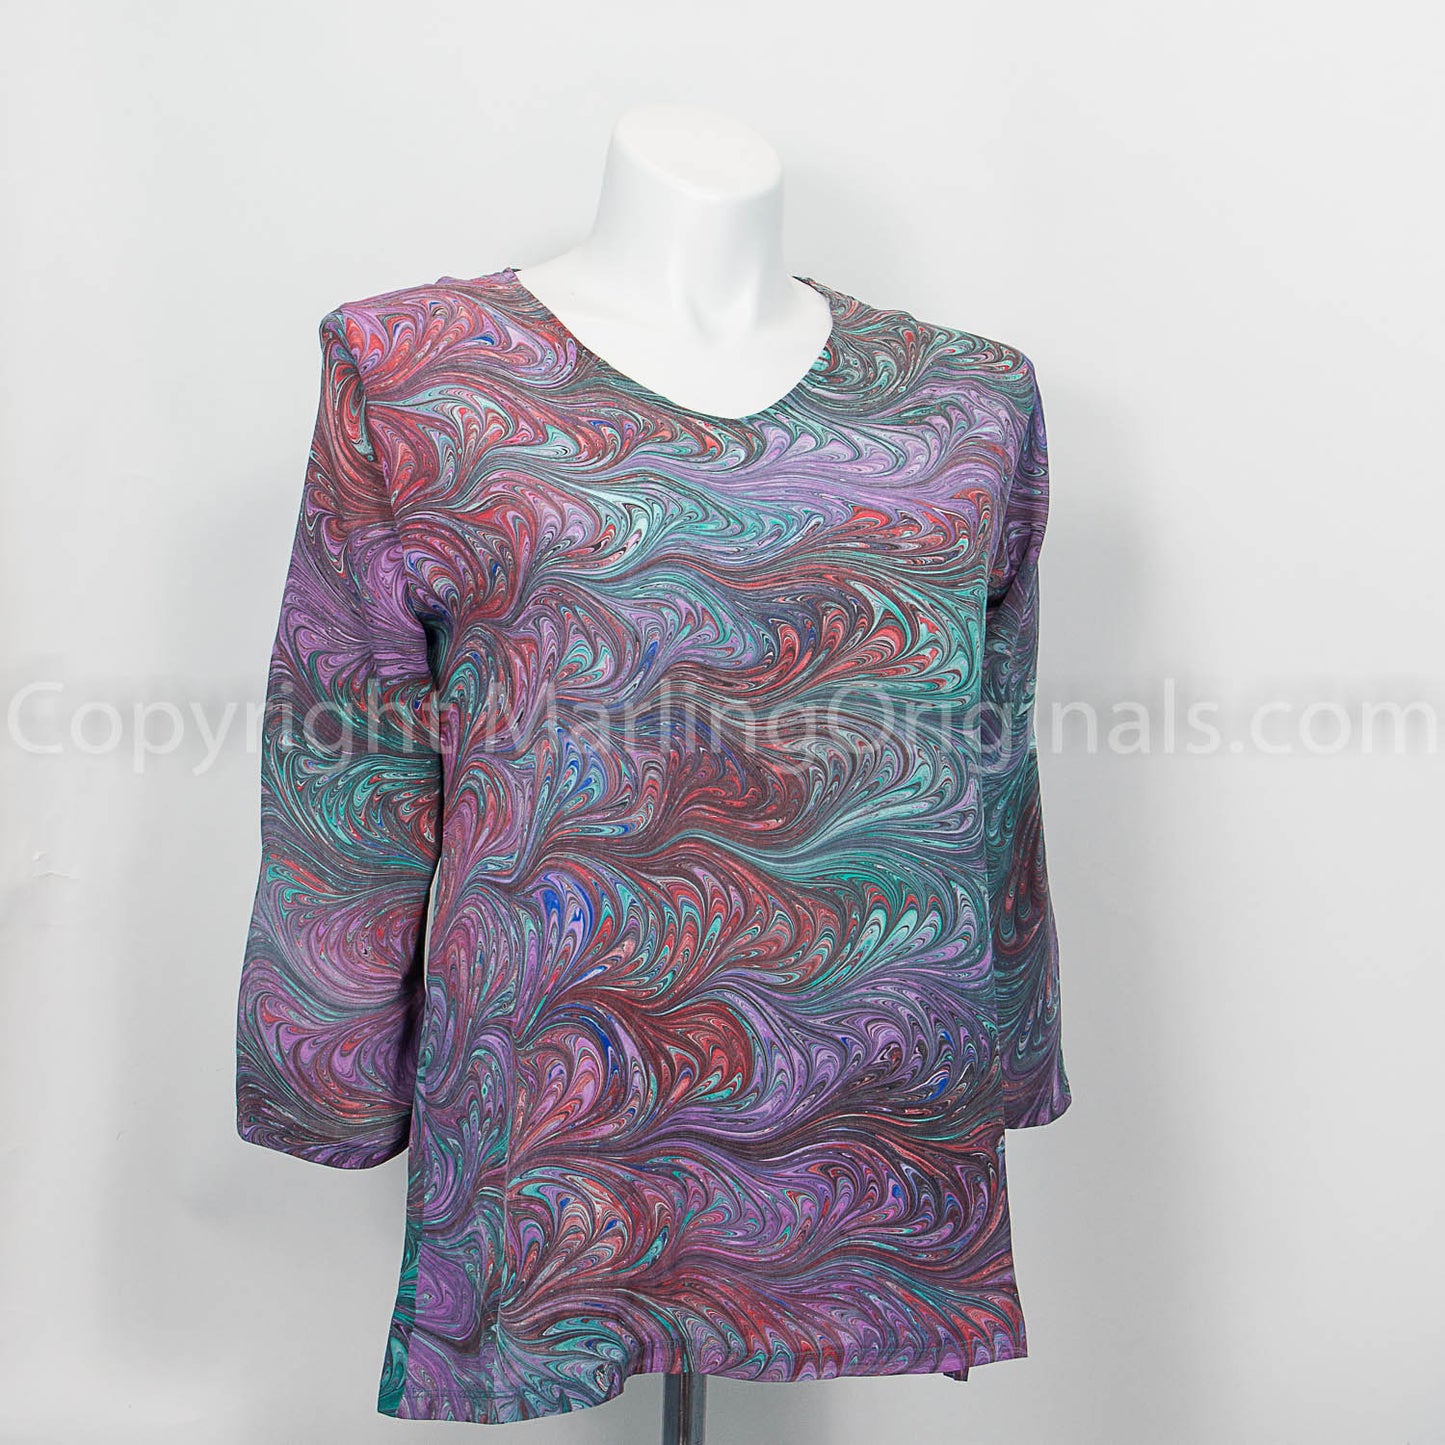 v neck 3/4 sleeve silk tunic with a marbled feathered pattern in lavender, rose, red, green